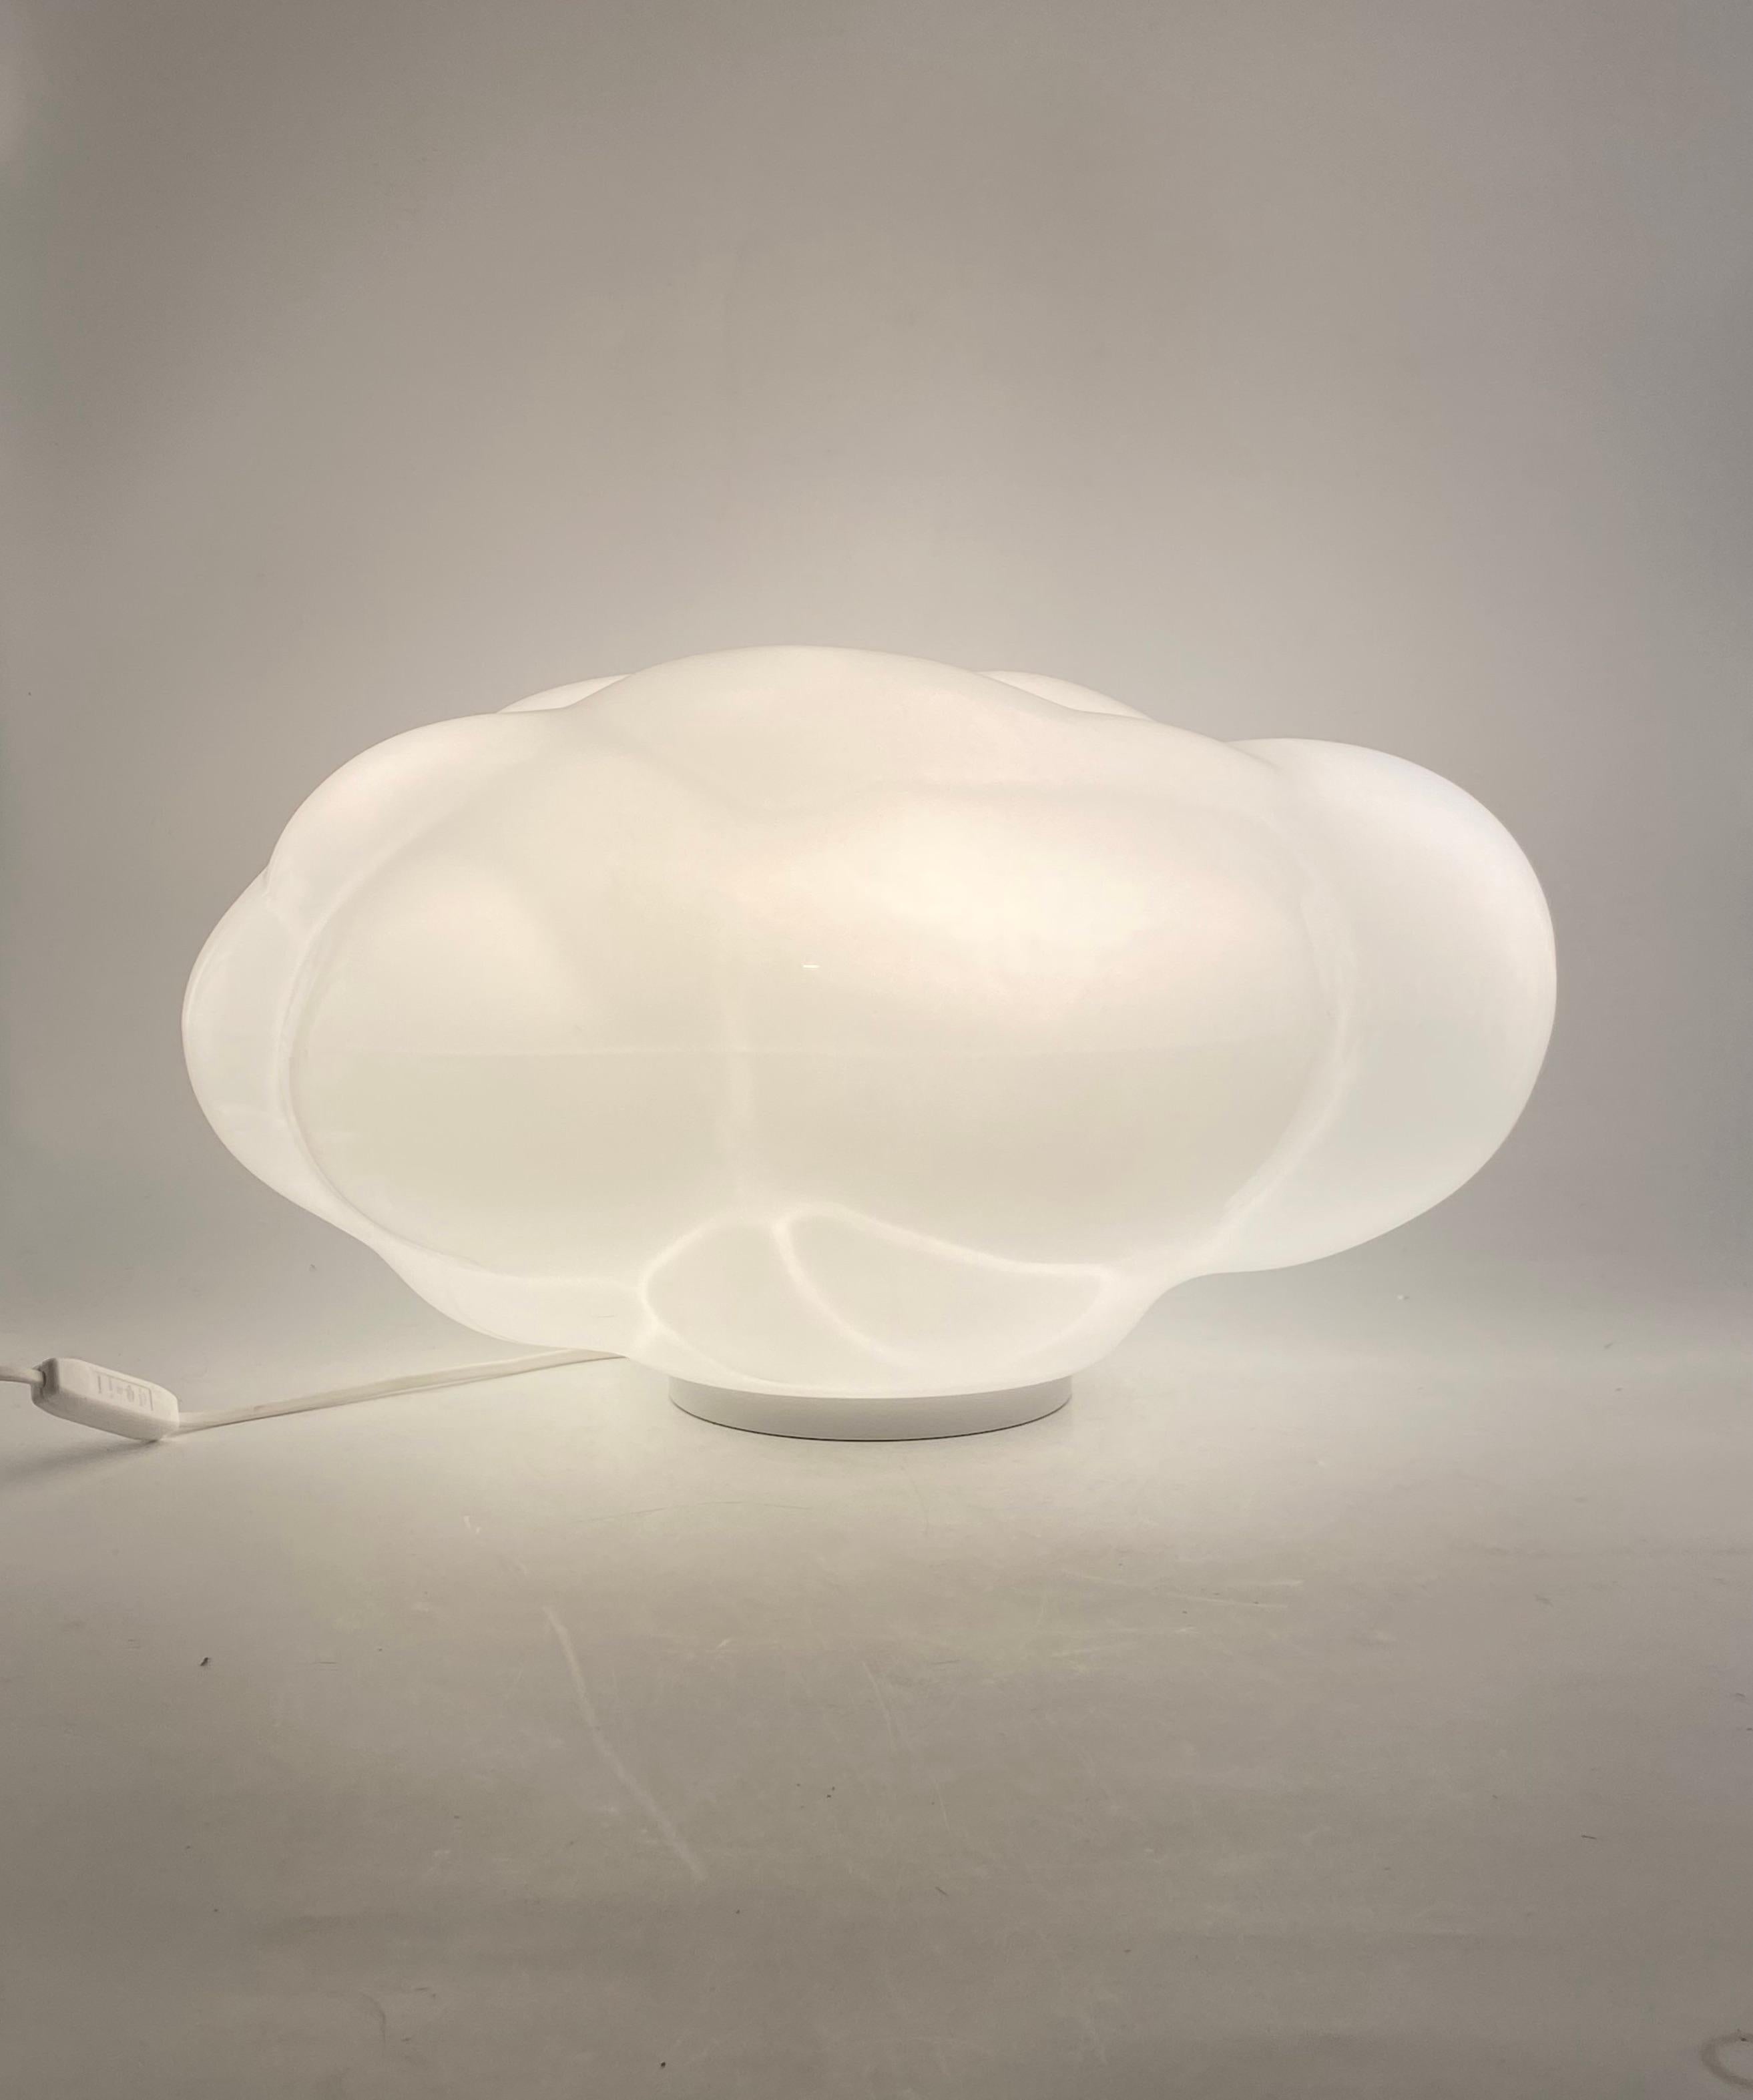 Carlo Cattaneo, Cloud Nuvola glass table lamp

Cattaneo, Italy 2000s

Opaline white glass, aluminum.

30 cm H - 50 x 35 cm

Conditions: good consistent with age and use. Some internal stains to the glass on one side of the lamp.